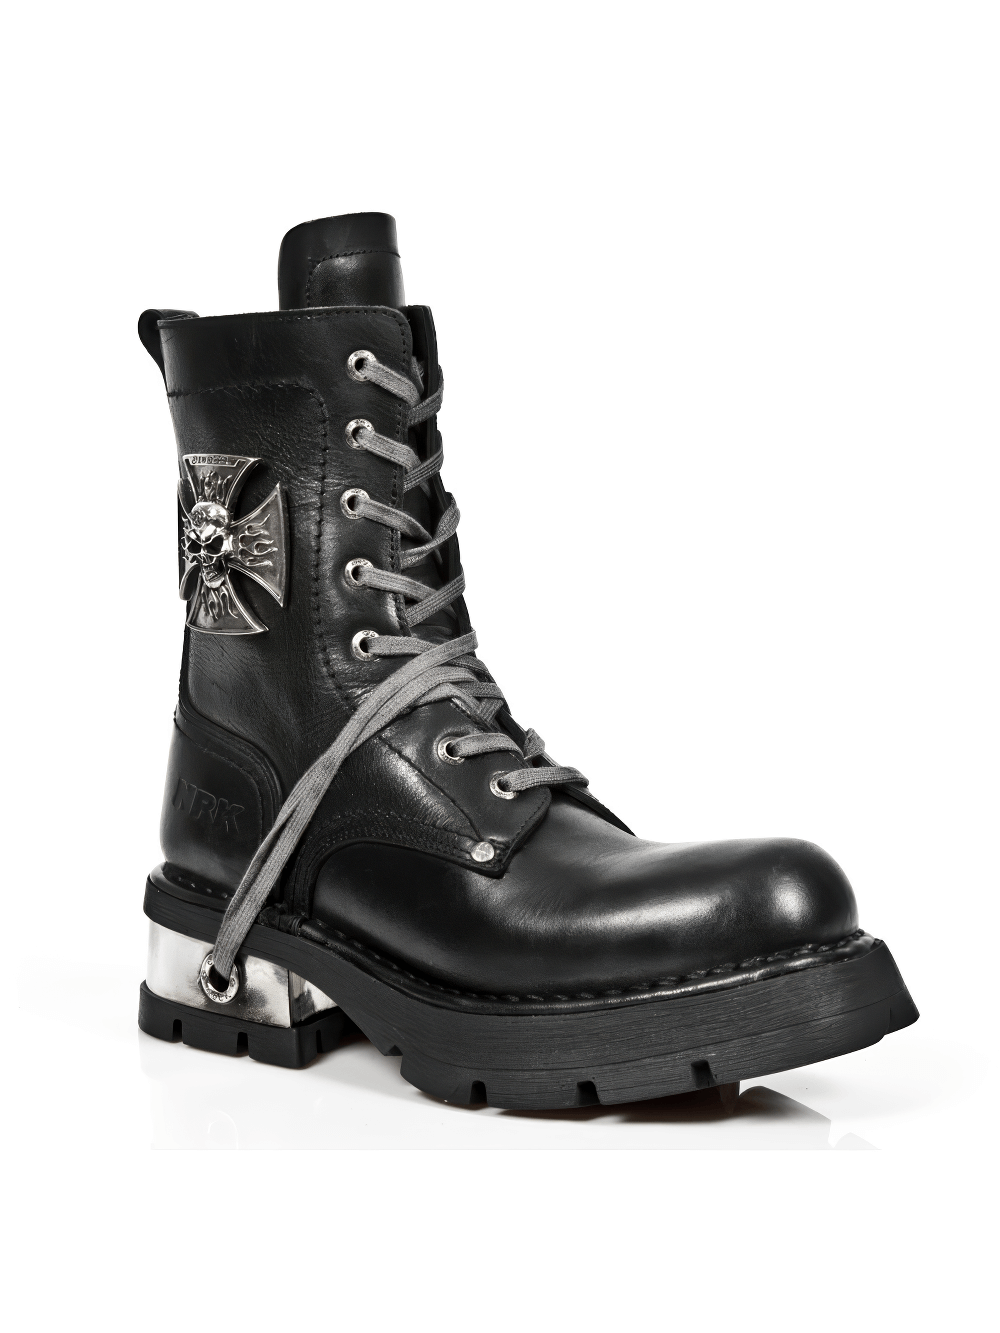 NEW ROCK Unisex Metal Skull Lace-Up Leather Ankle Boot